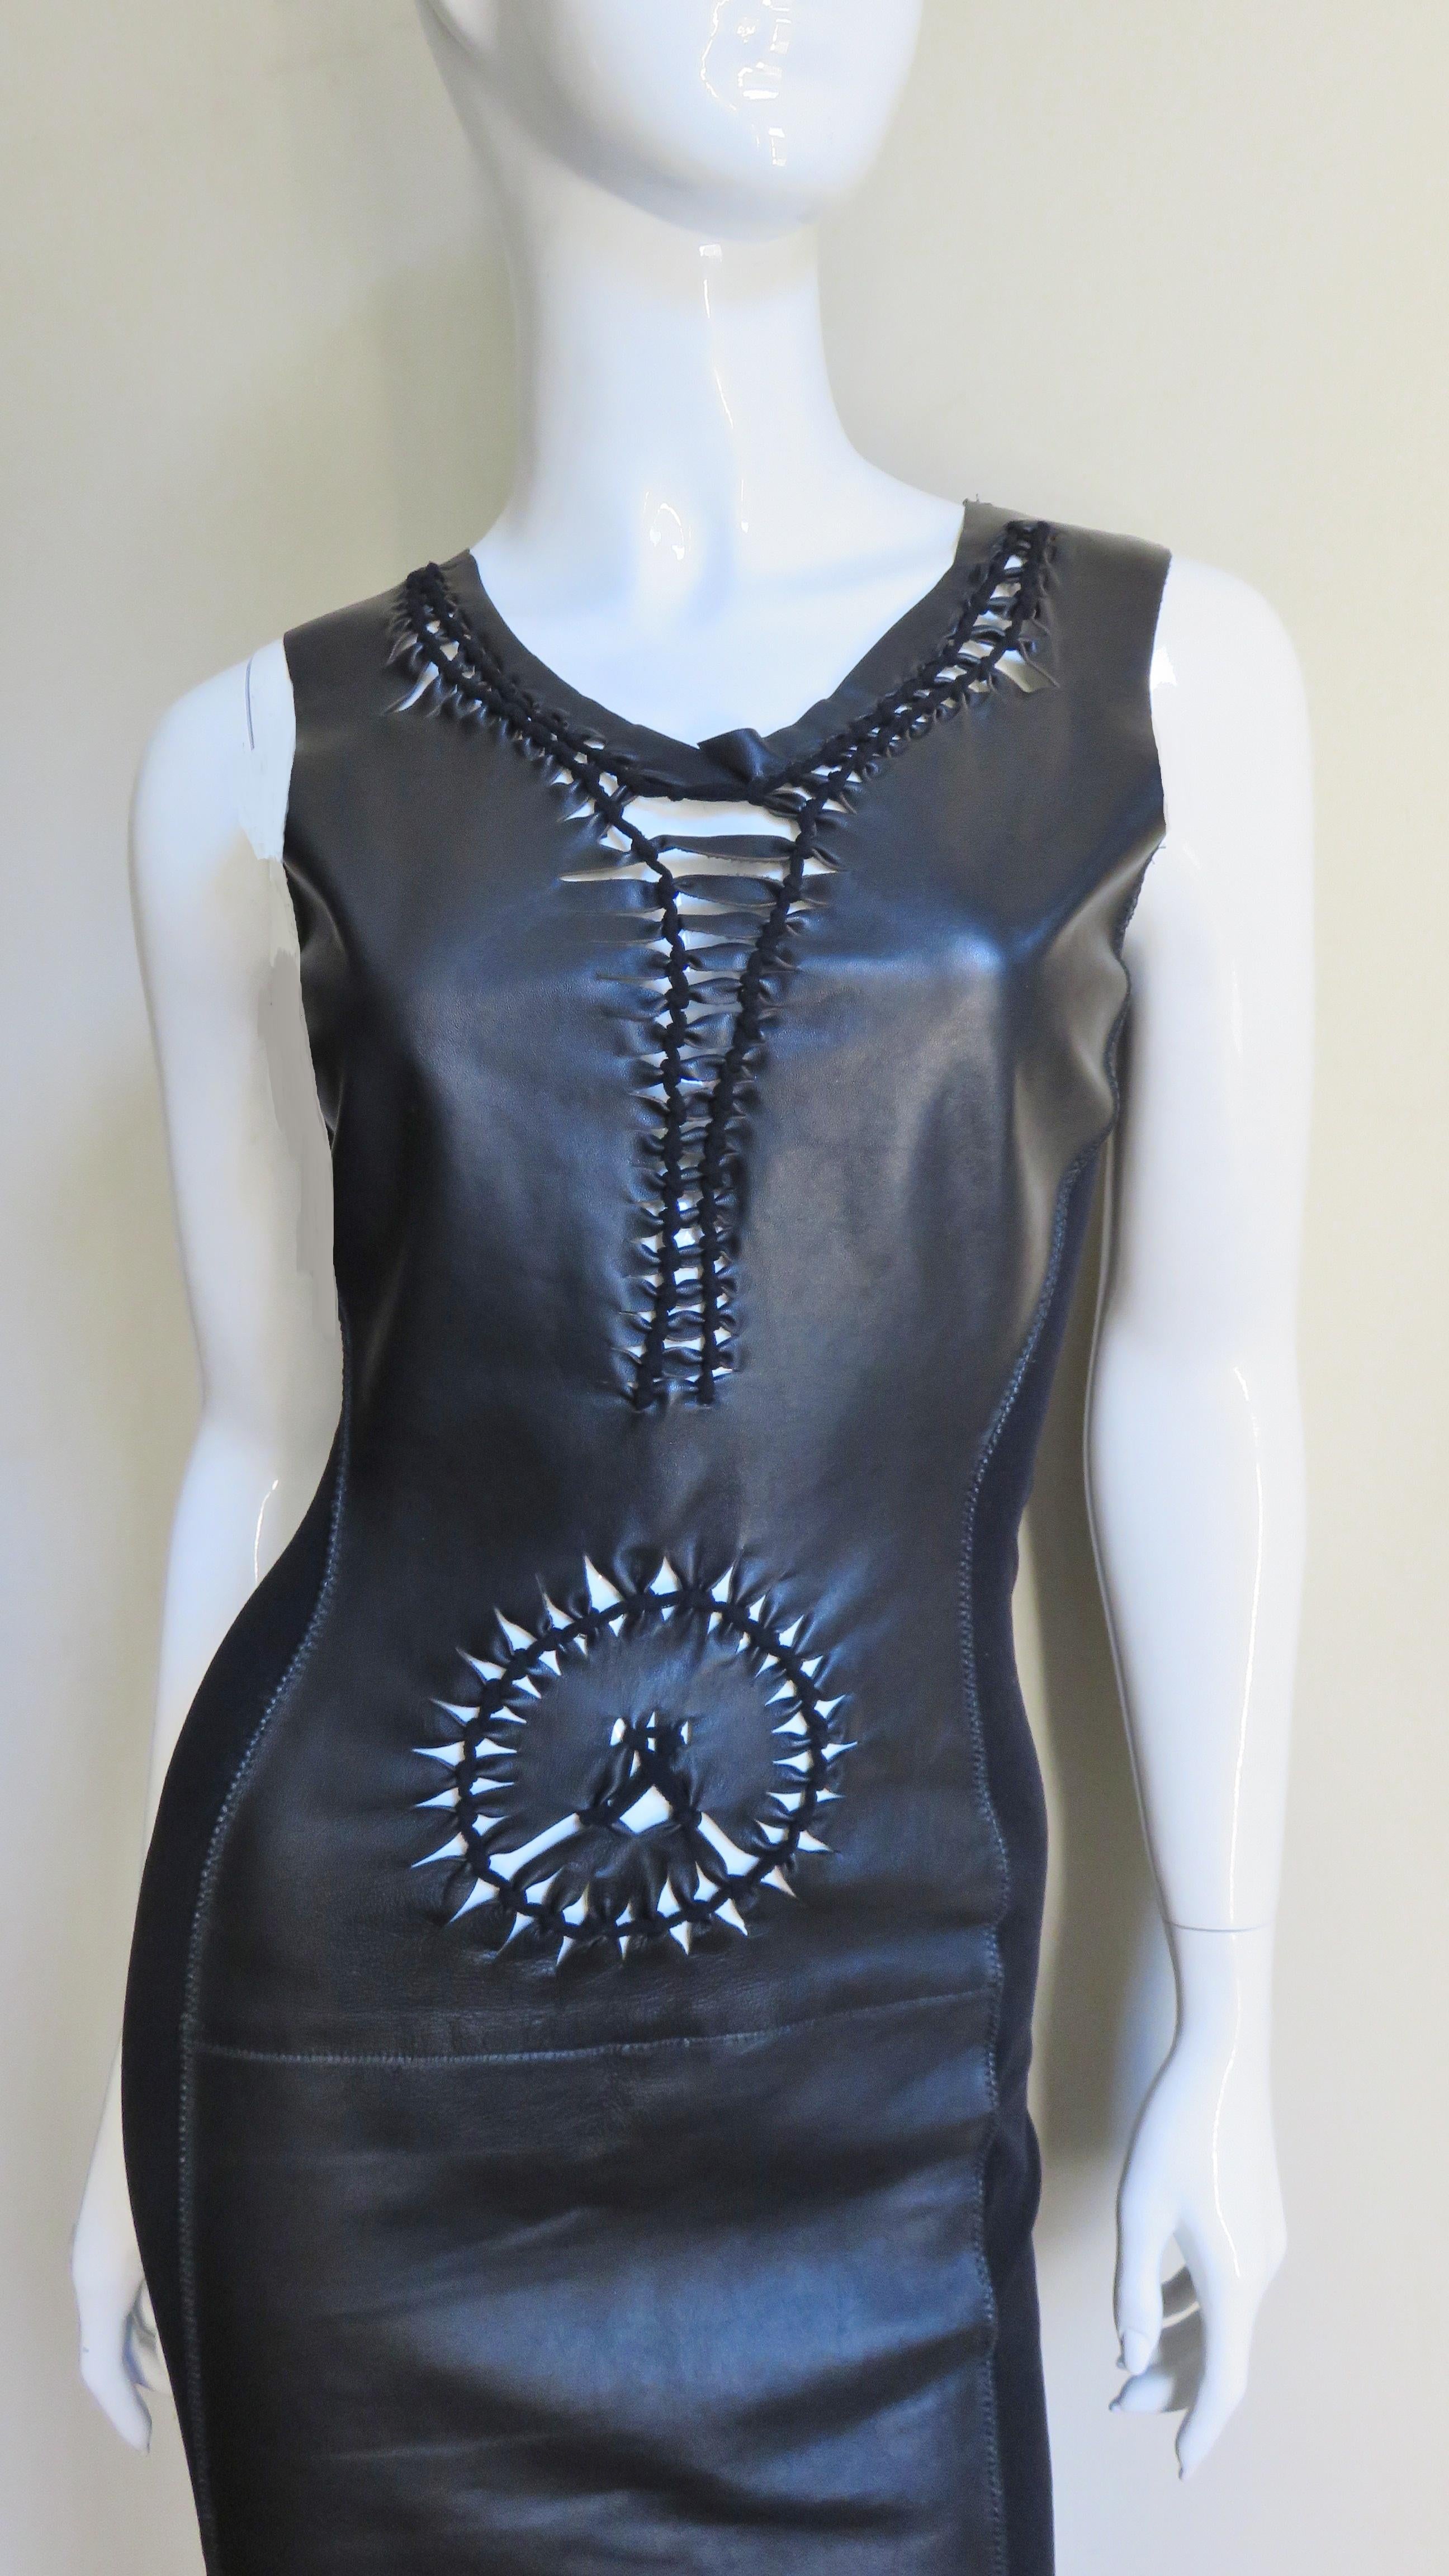 A fabulous black, supple leather dress from Jean Paul Gaultier.   It is sleeveless with a detailed front consisting of leather strips and knots forming a circle at the waist and highlighting a V neckline.  The back and sides of the dress are made of